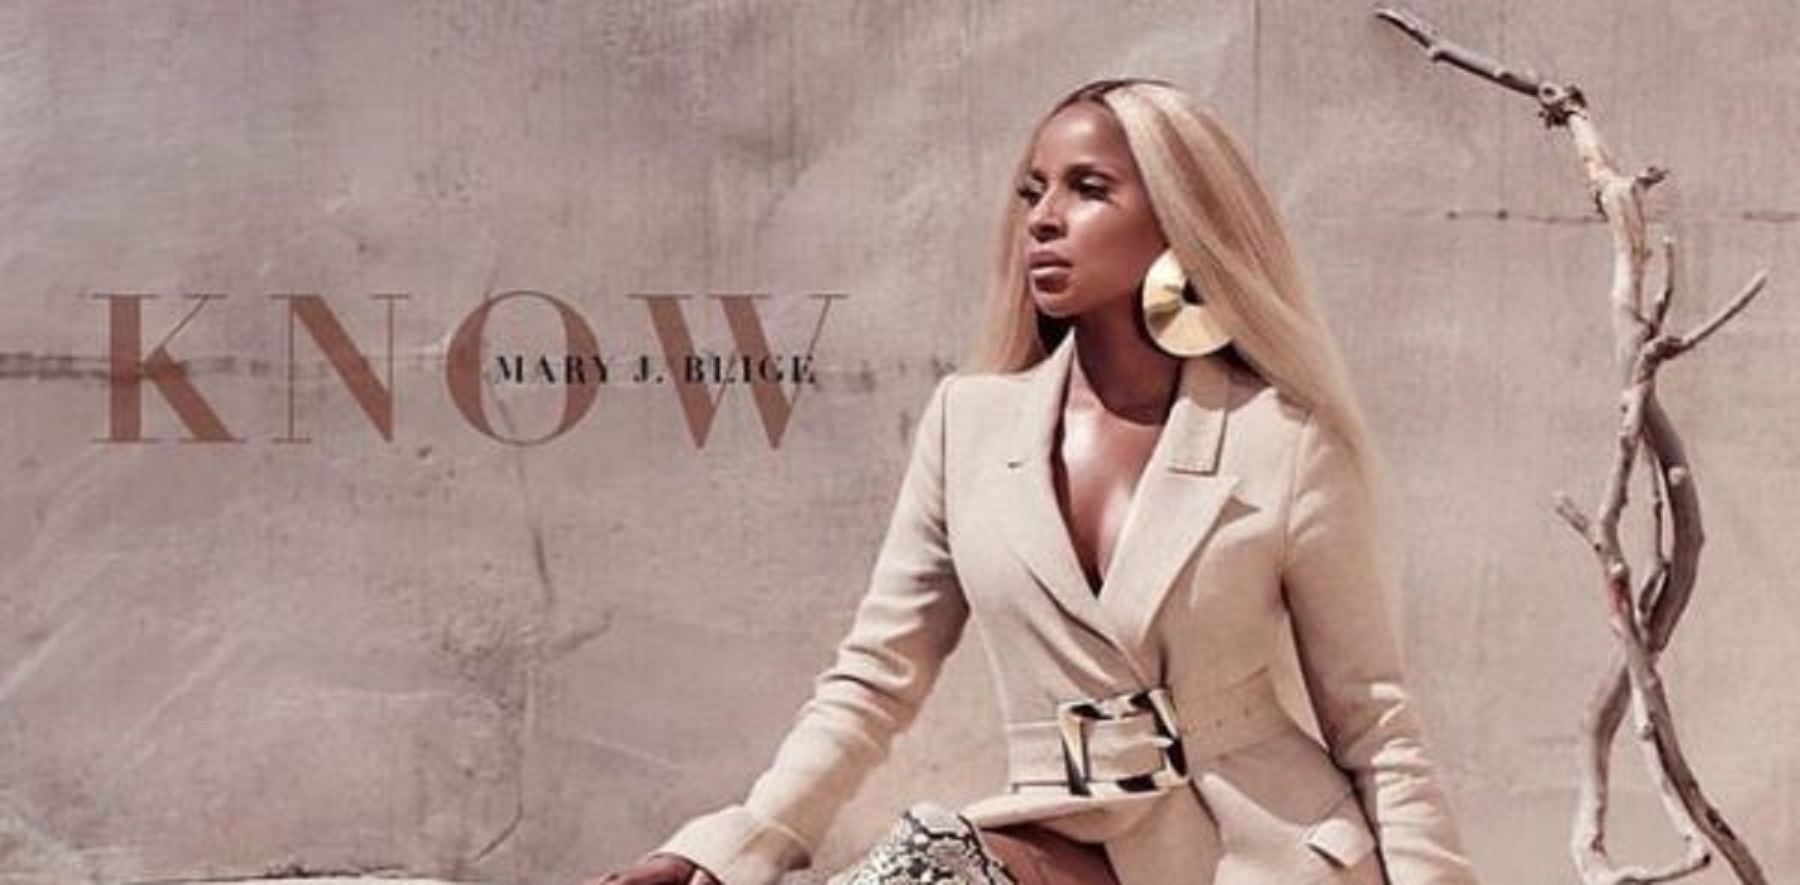 Listen to Mary J. Blige’s New Song – ‘Know’